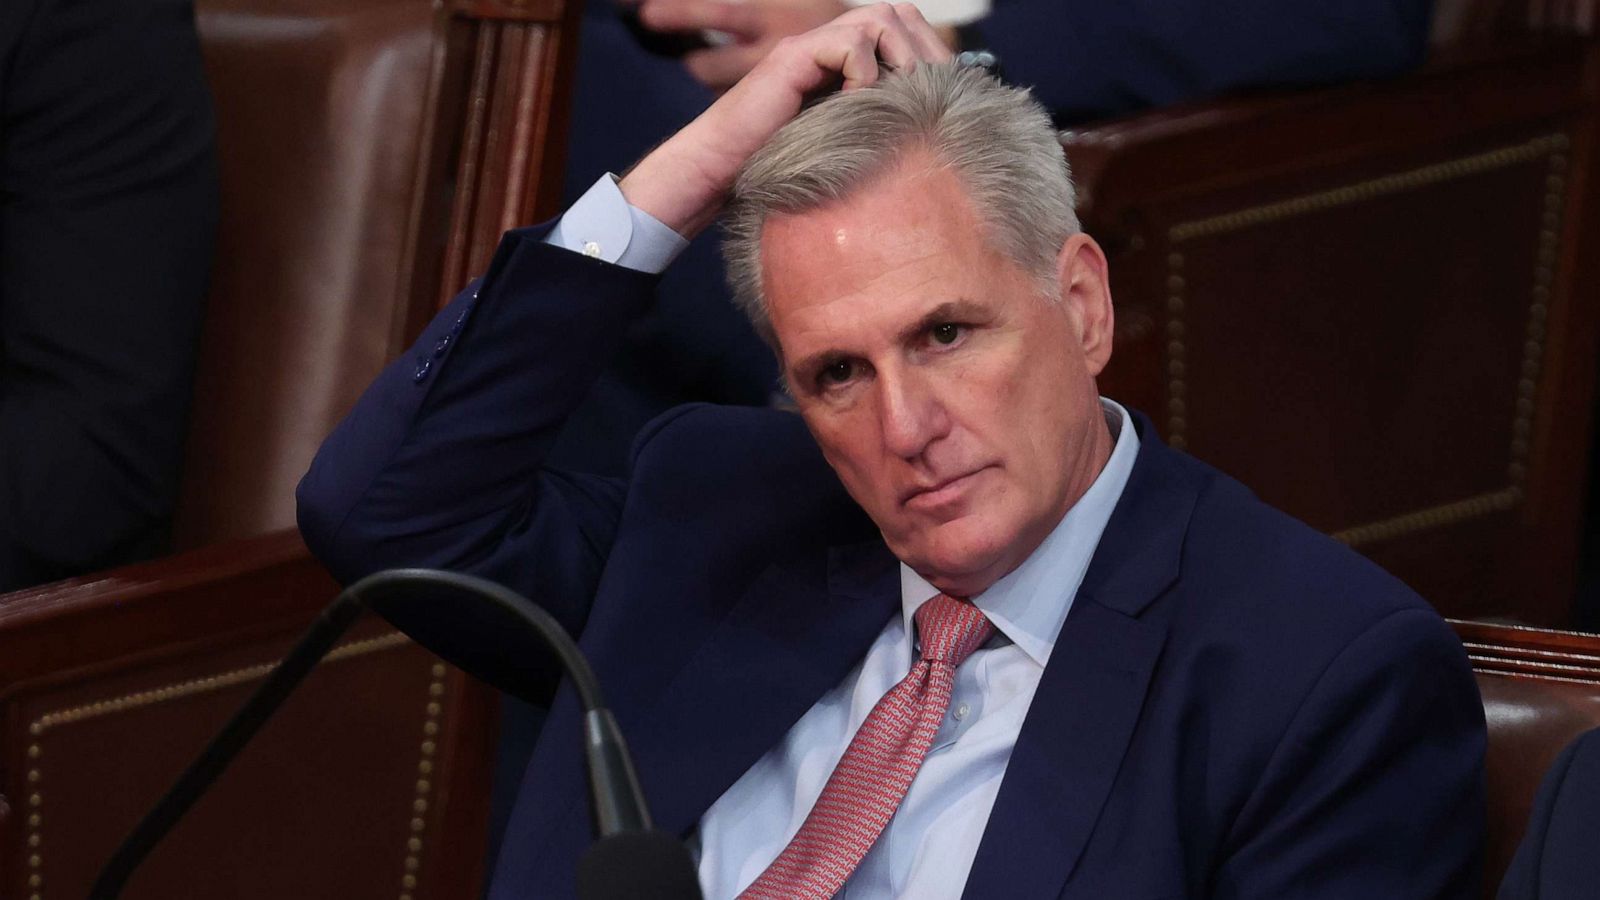 Kevin McCarthy elected as House speaker, ending four-day leadership standoff - cover